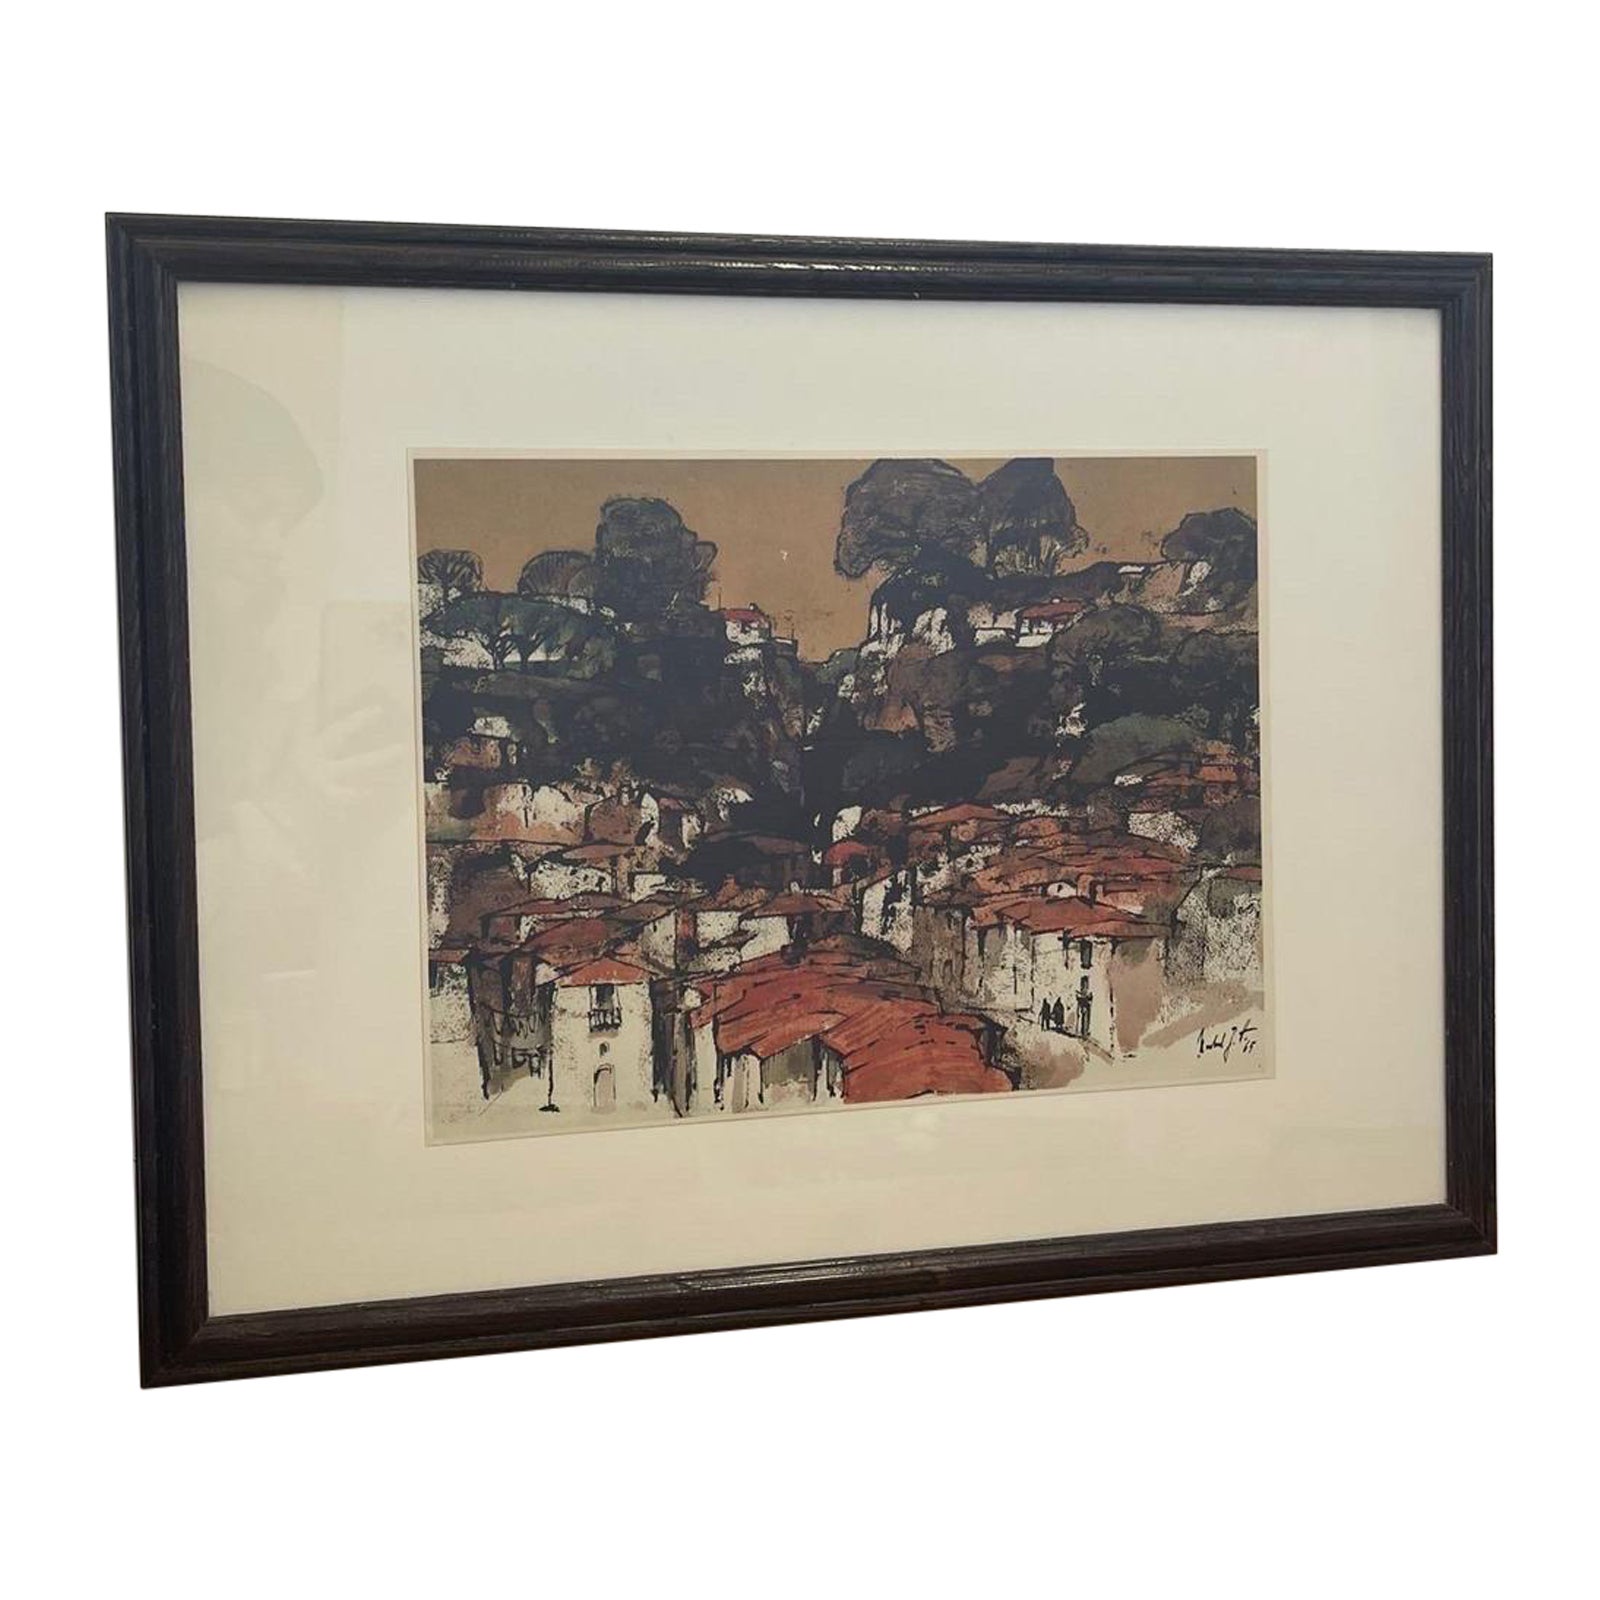 Vintage Framed and Signed Art Print “Mountain Village in Portugal” by Hartmann For Sale